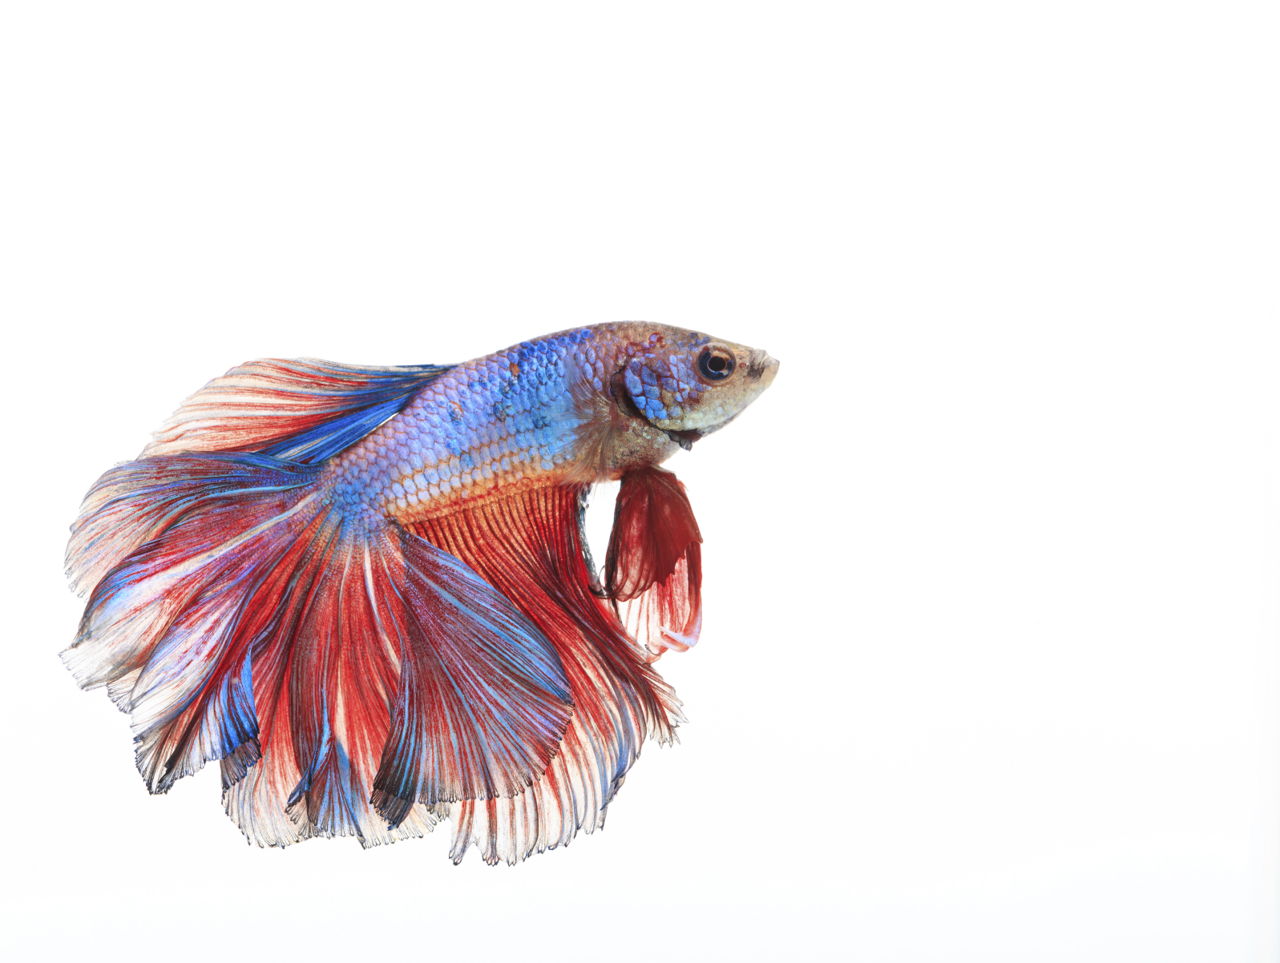 Betta Fish Care Instructions: How to Take Care of Betta fish